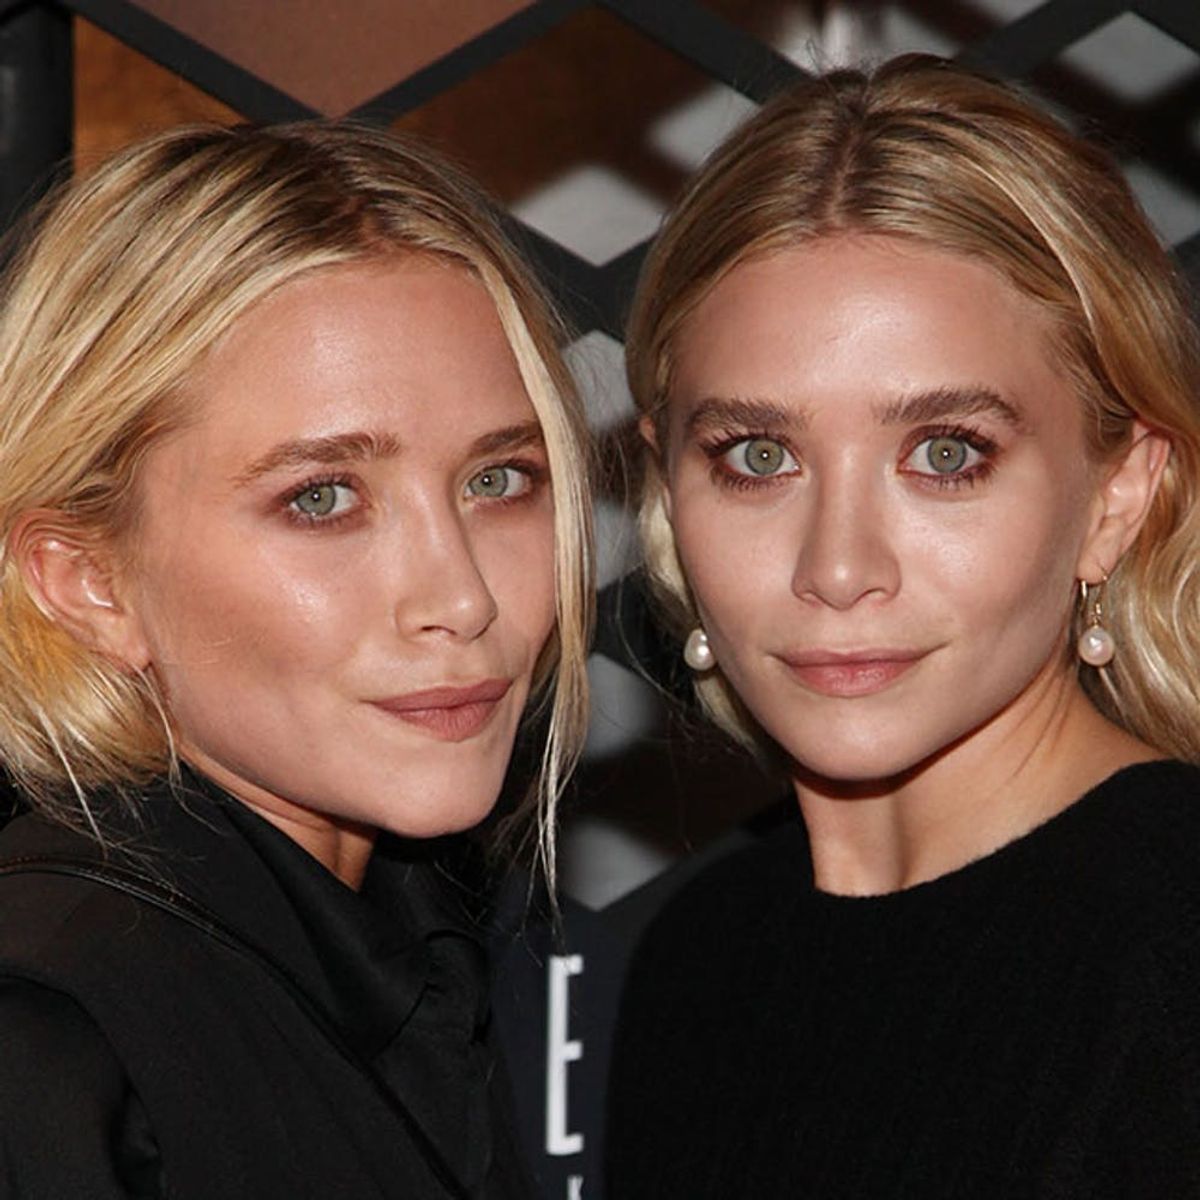 5 Makeup Hacks You Should Steal from the Olsen Twins - Brit + Co